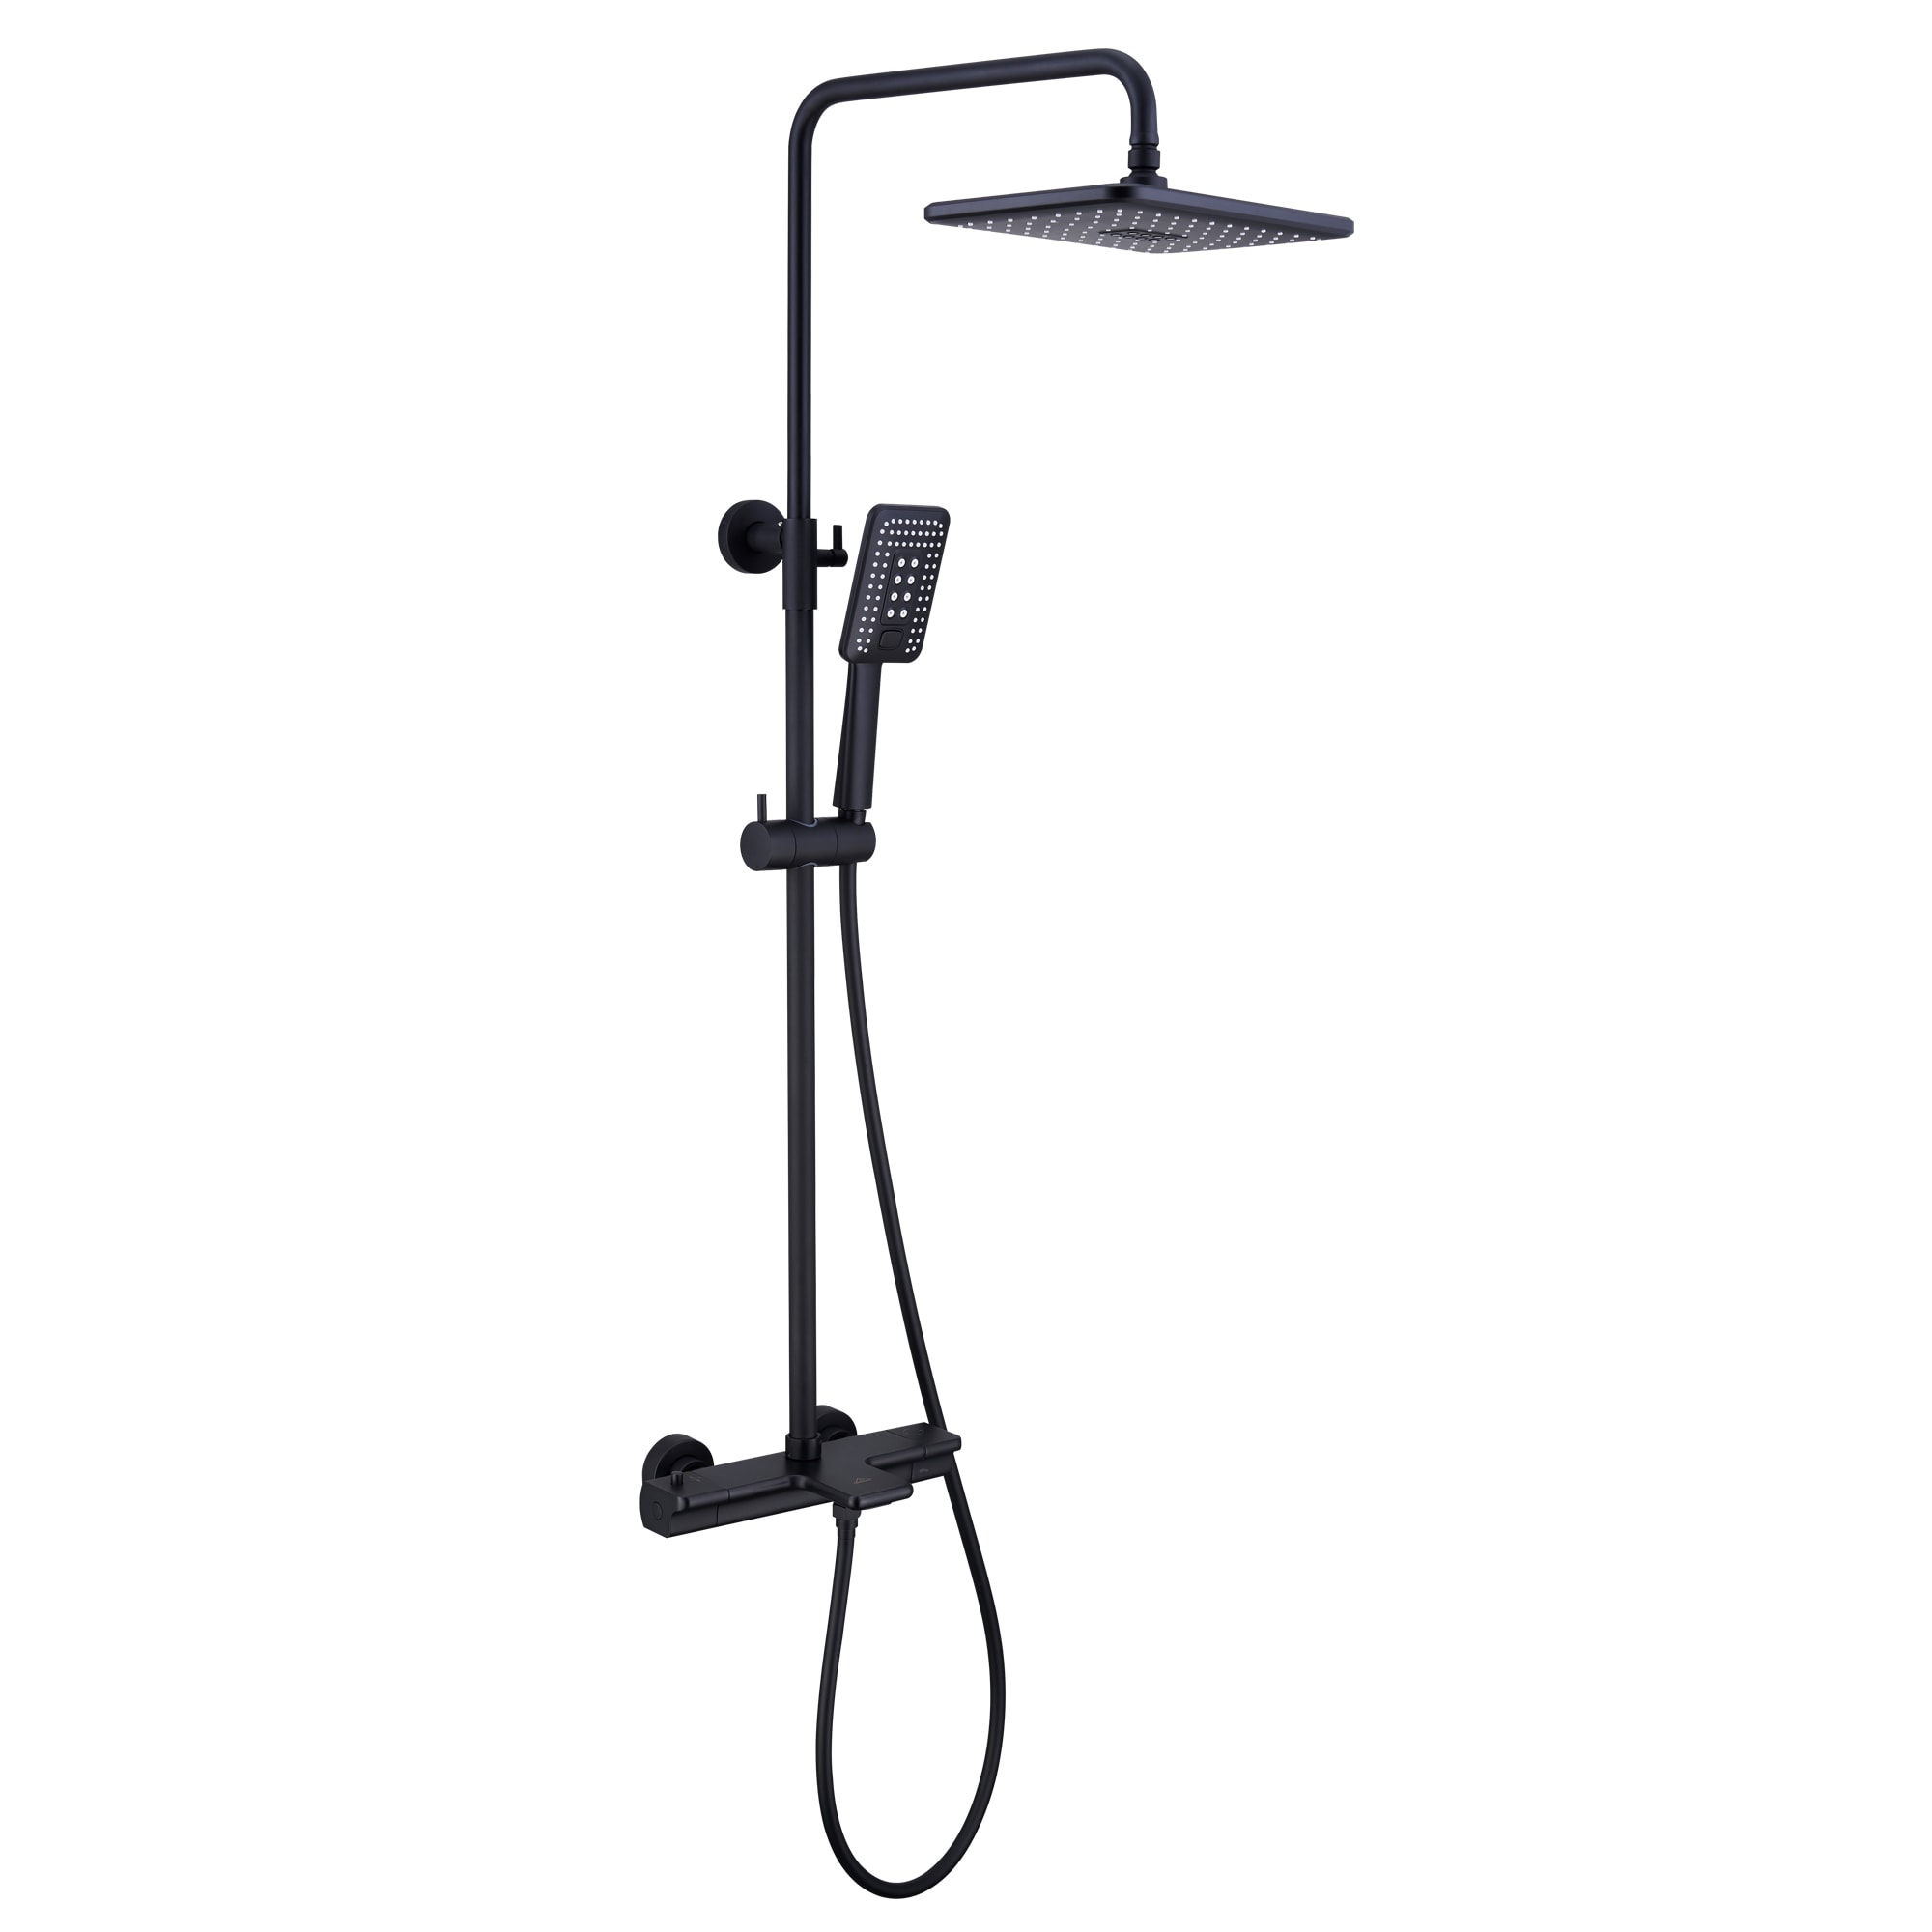 CASAINC Thermostatic shower system Matte Black Shower Faucet Bar System  with 2-way Diverter Valve Included in the Shower Systems department at